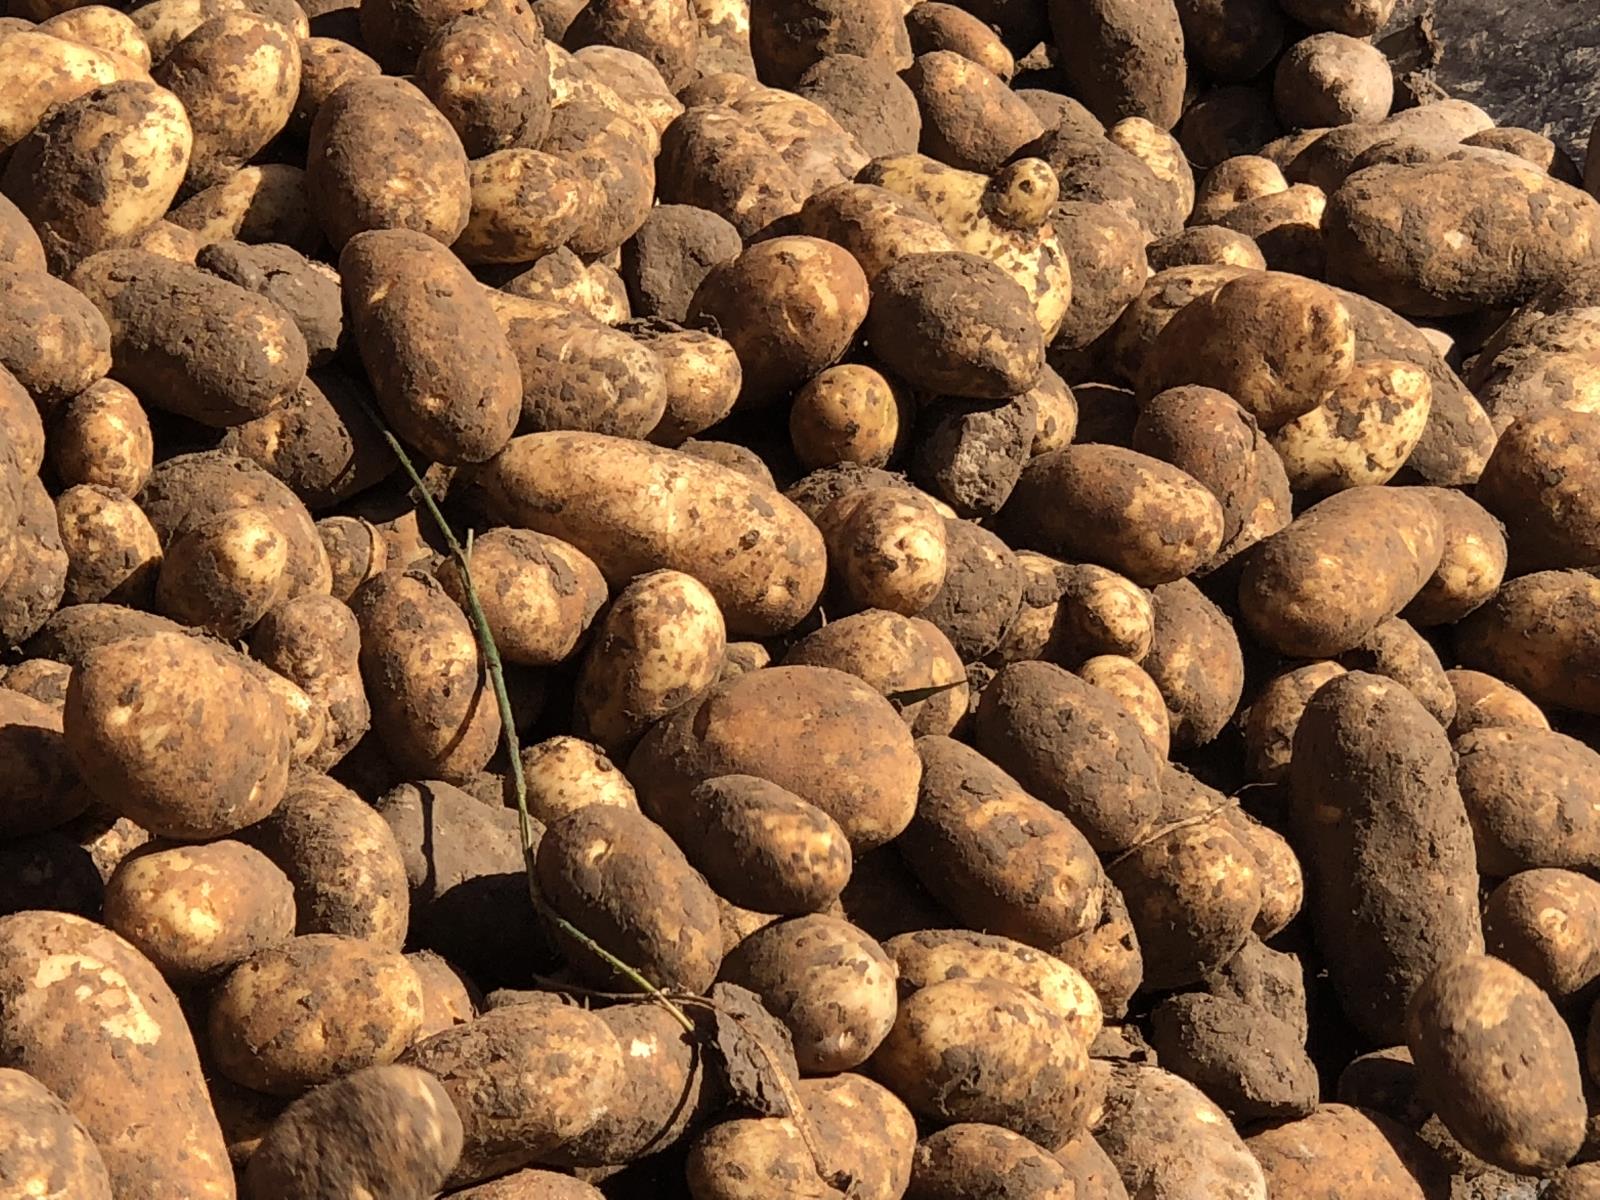 Idaho’s potato industry is applauding a letter issued by the state’s two U.S. senators calling for increased access for U.S. fresh potato exports into Mexico. 